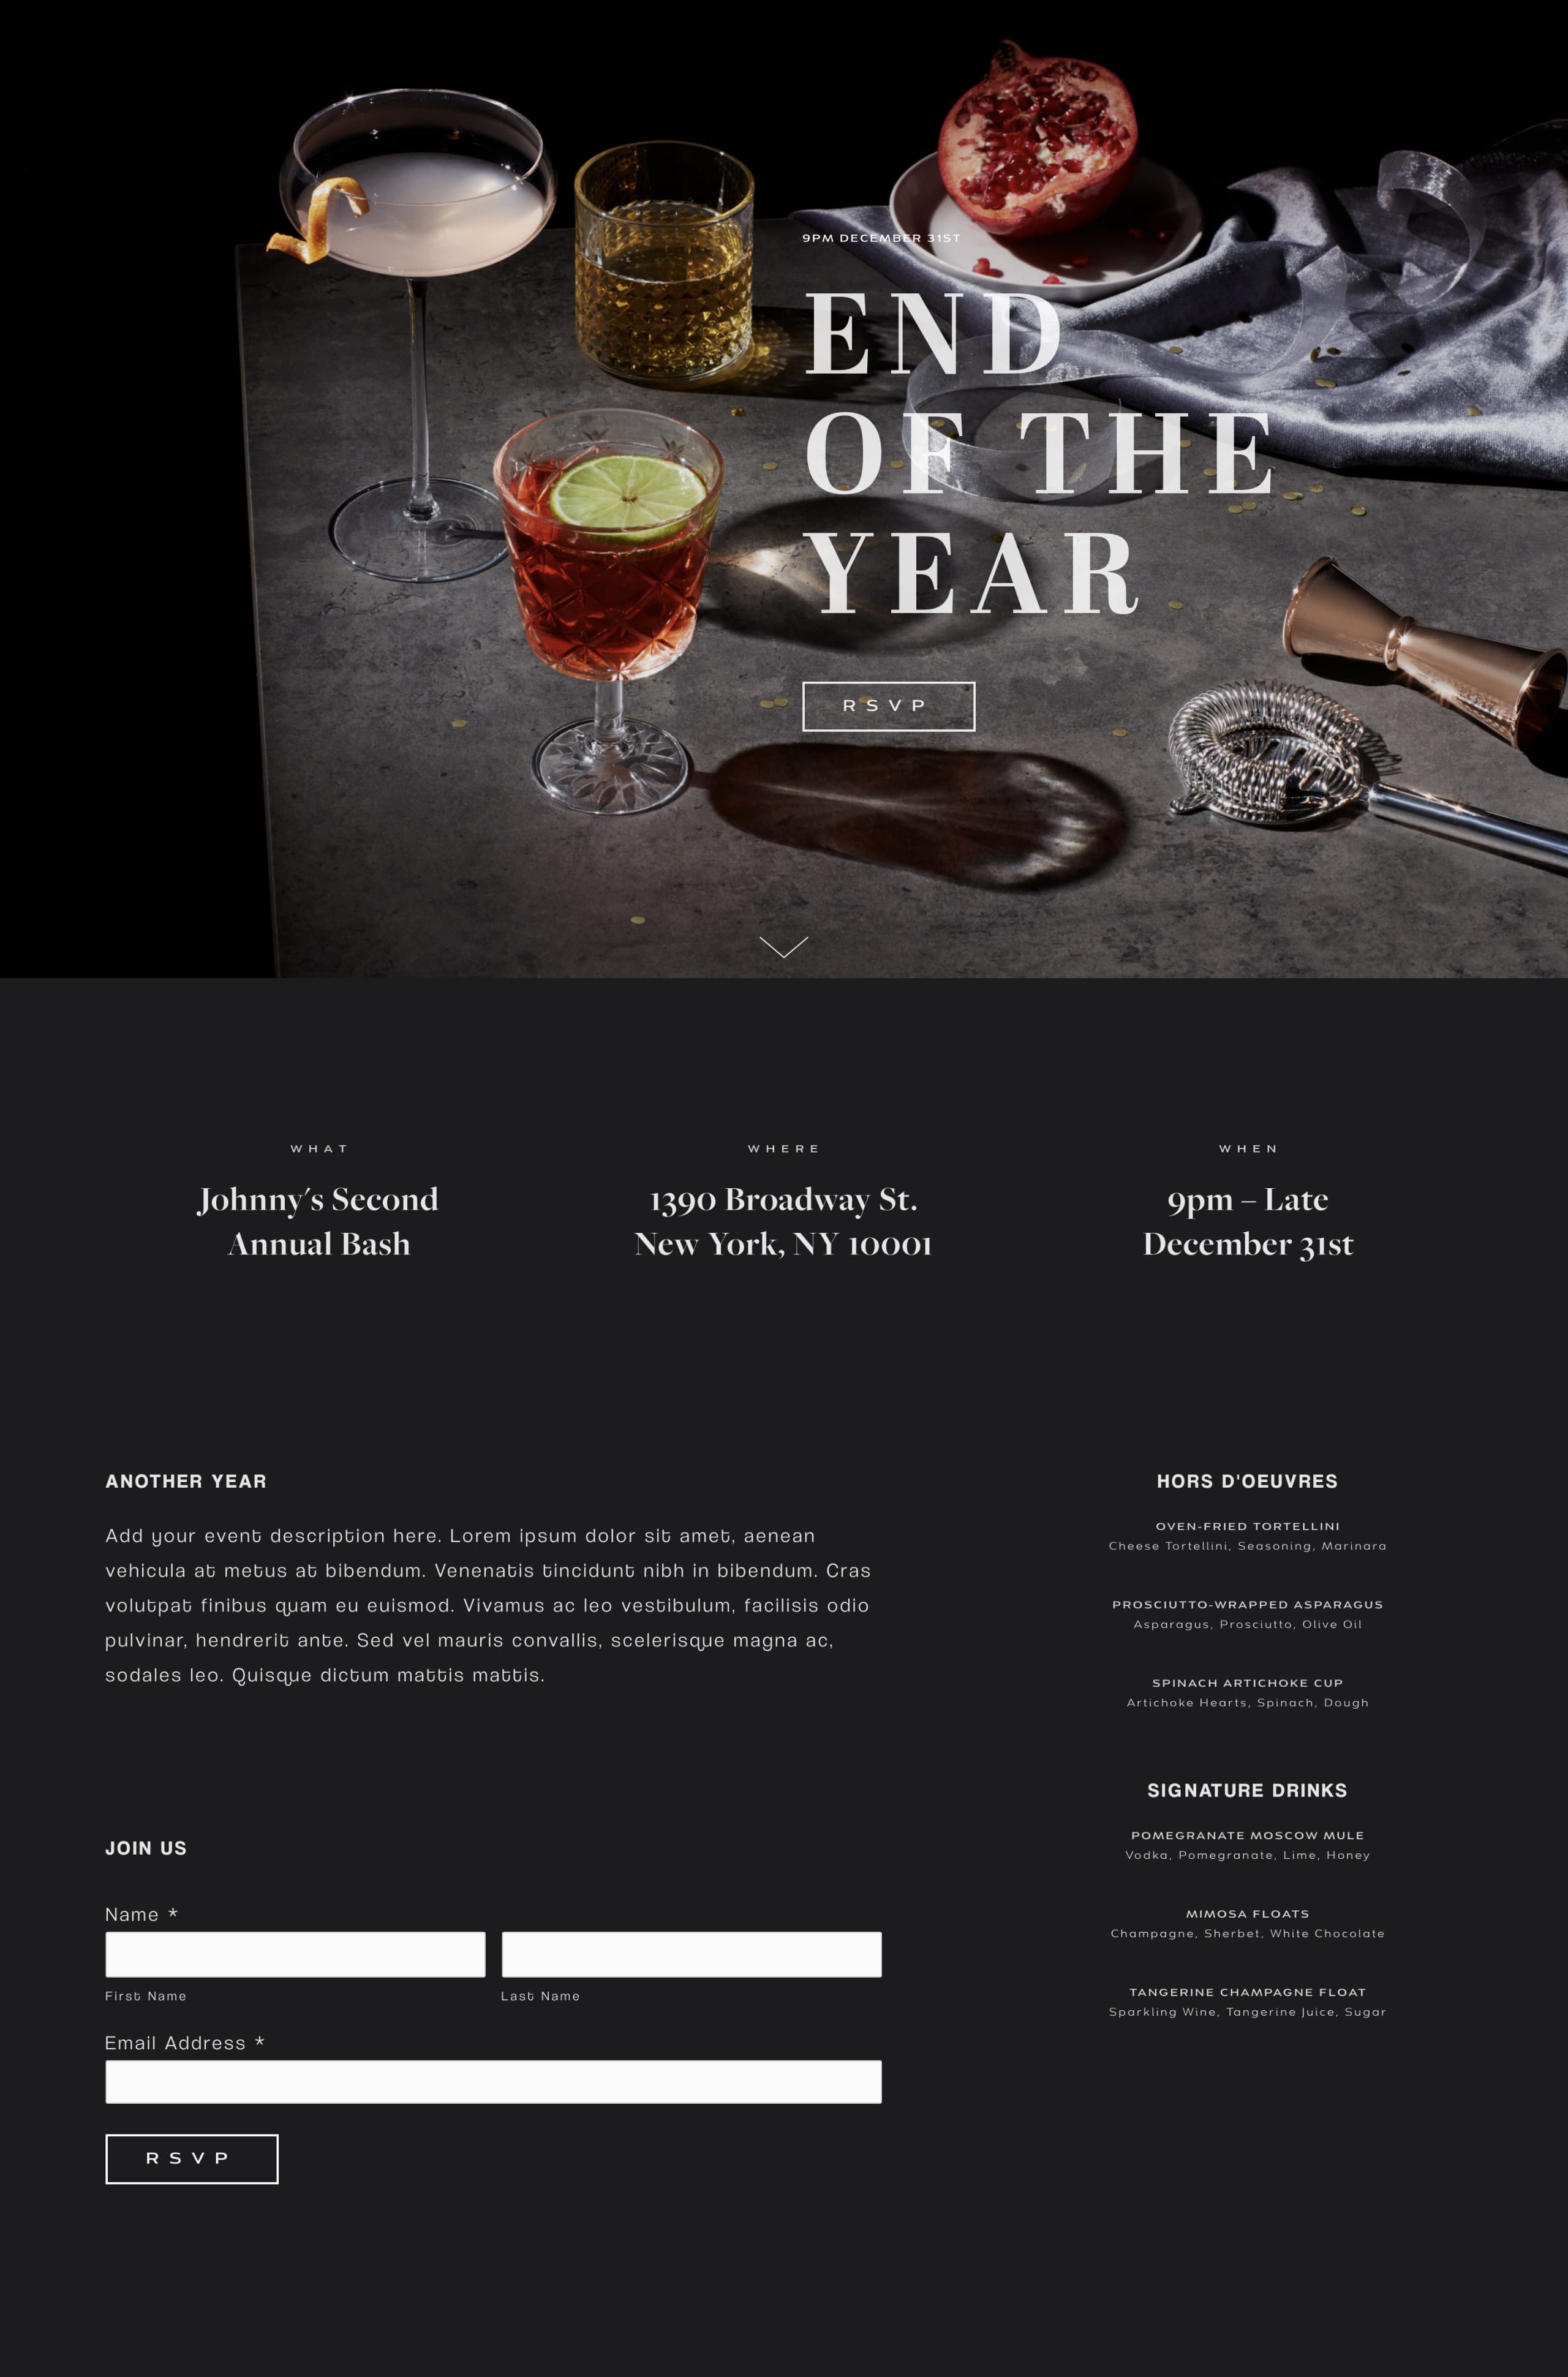 squarespace parallax scrolling